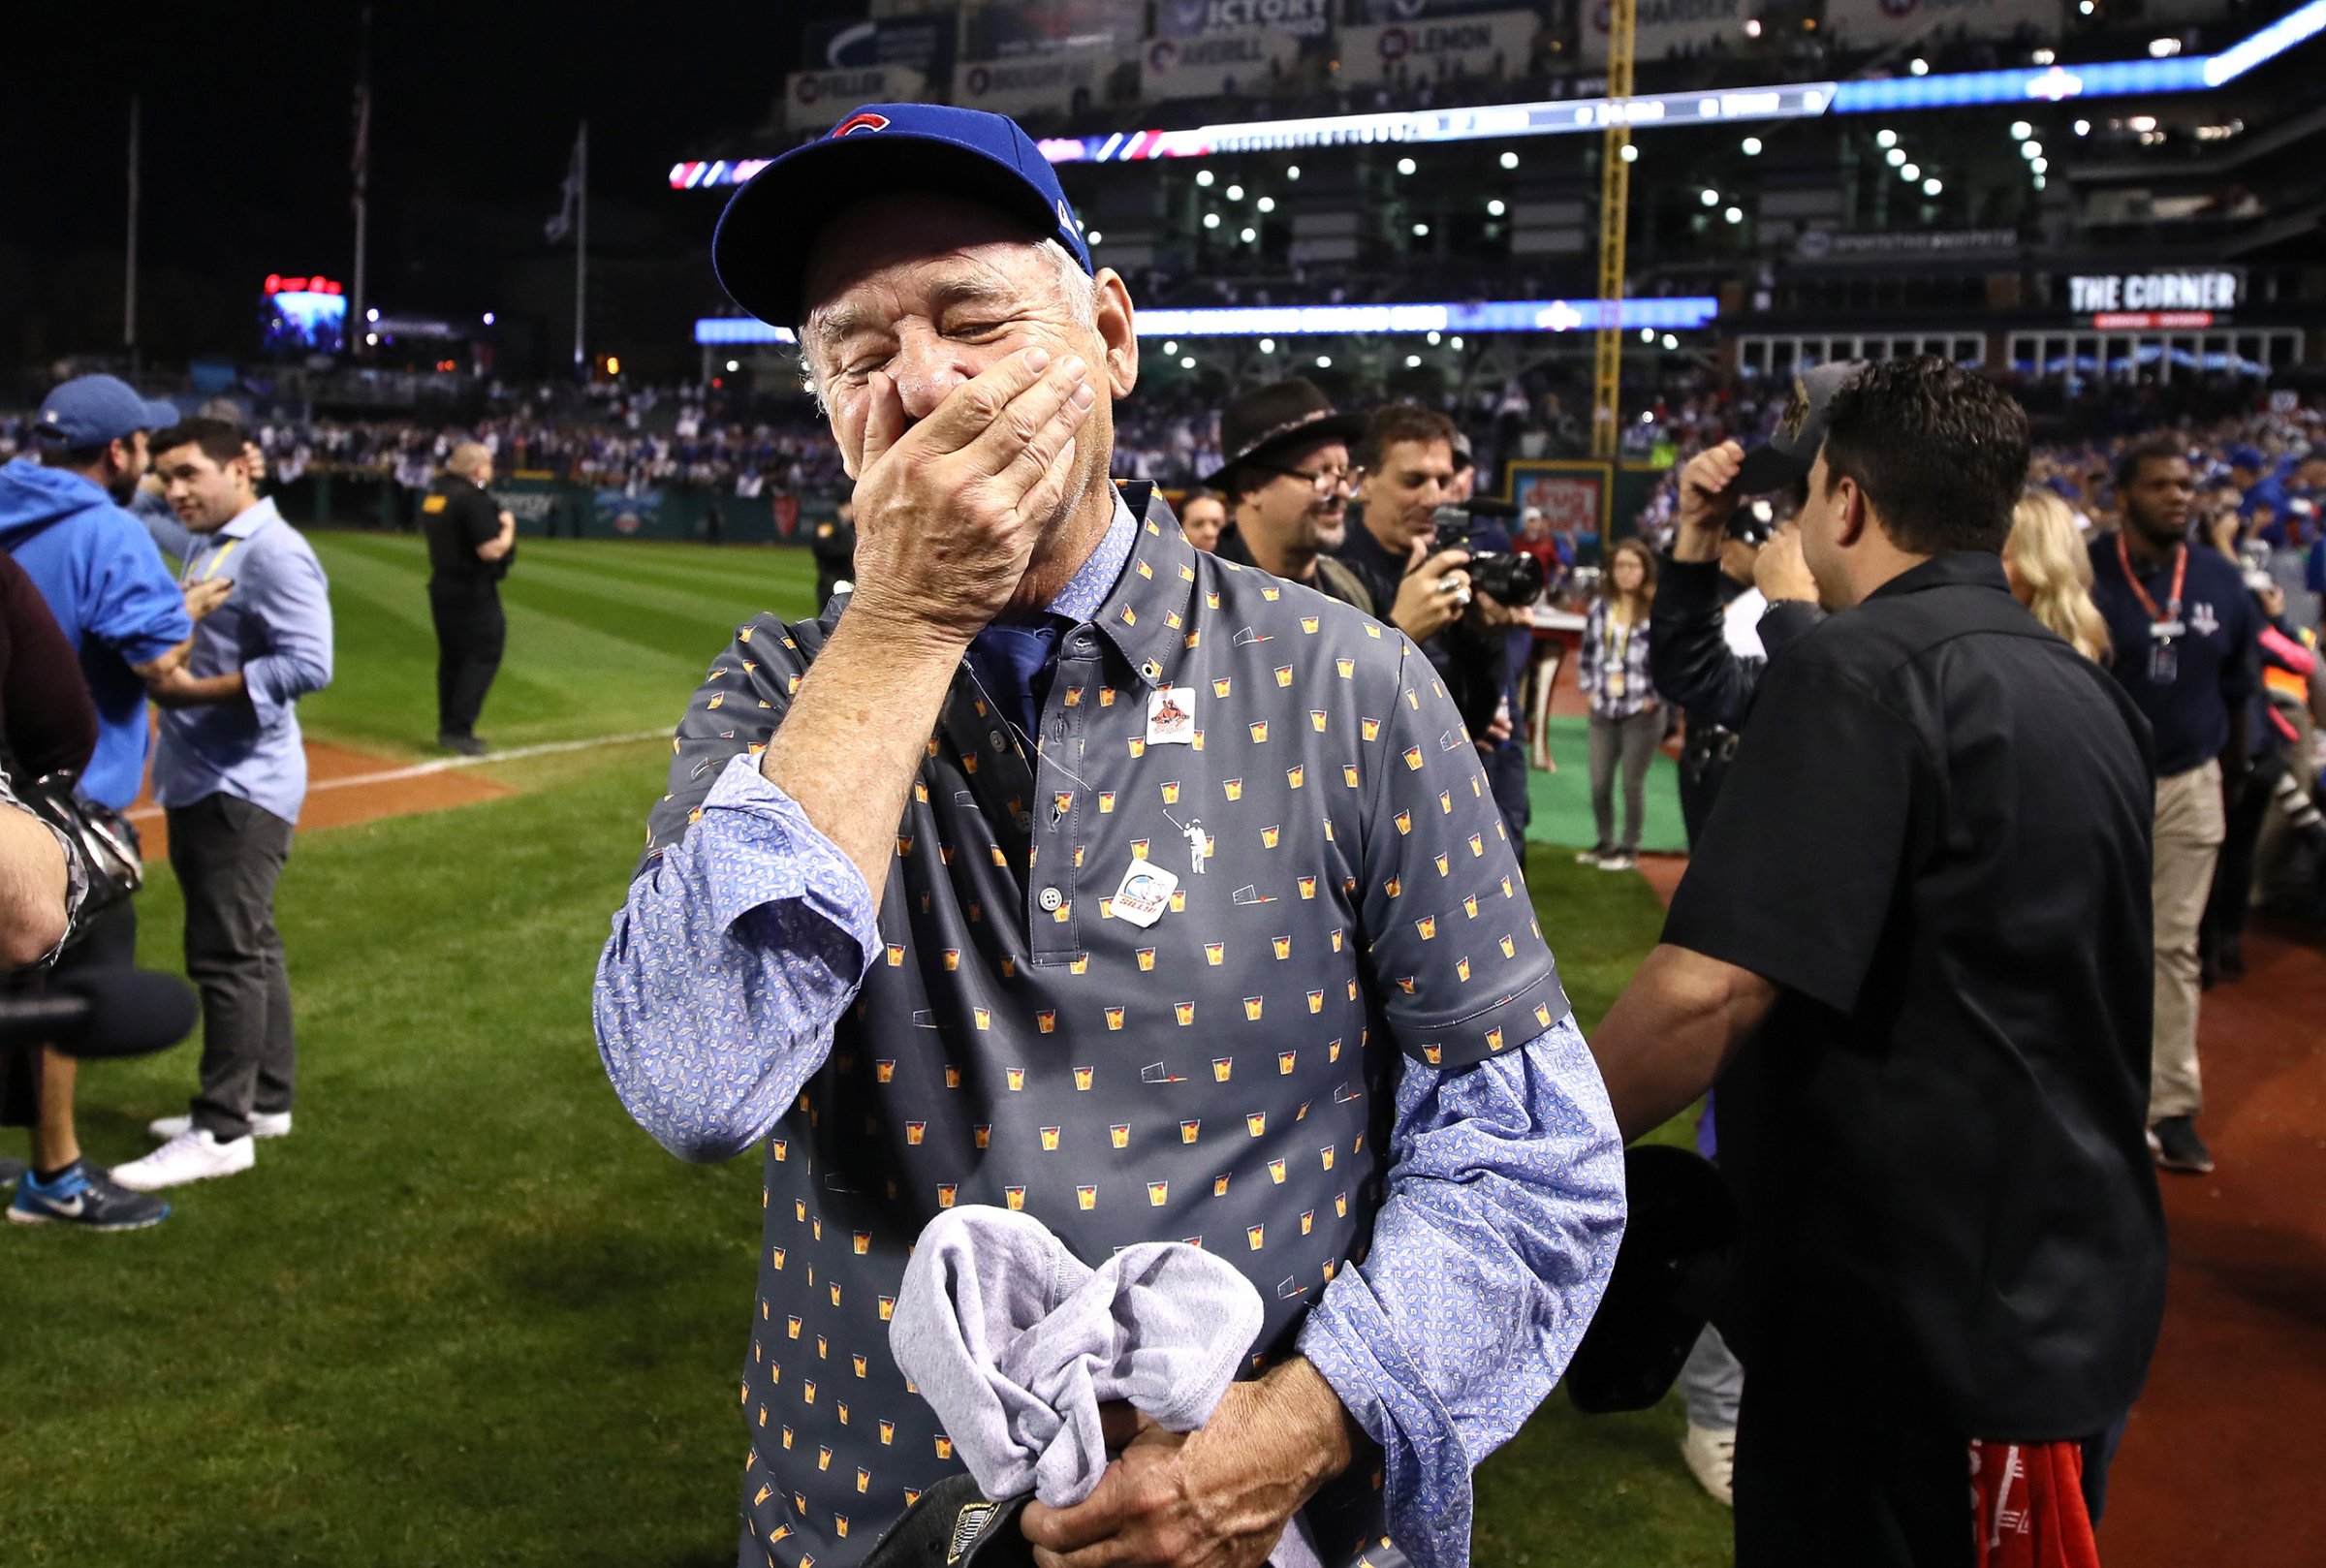 Actor Bill Murray reacts on the field after the Chicago Cubs defeated the Cleveland Indians 8-7 in Game Seven of the 2016 World Series at Progressive Field on Nov. 2, 2016 in Cleveland.